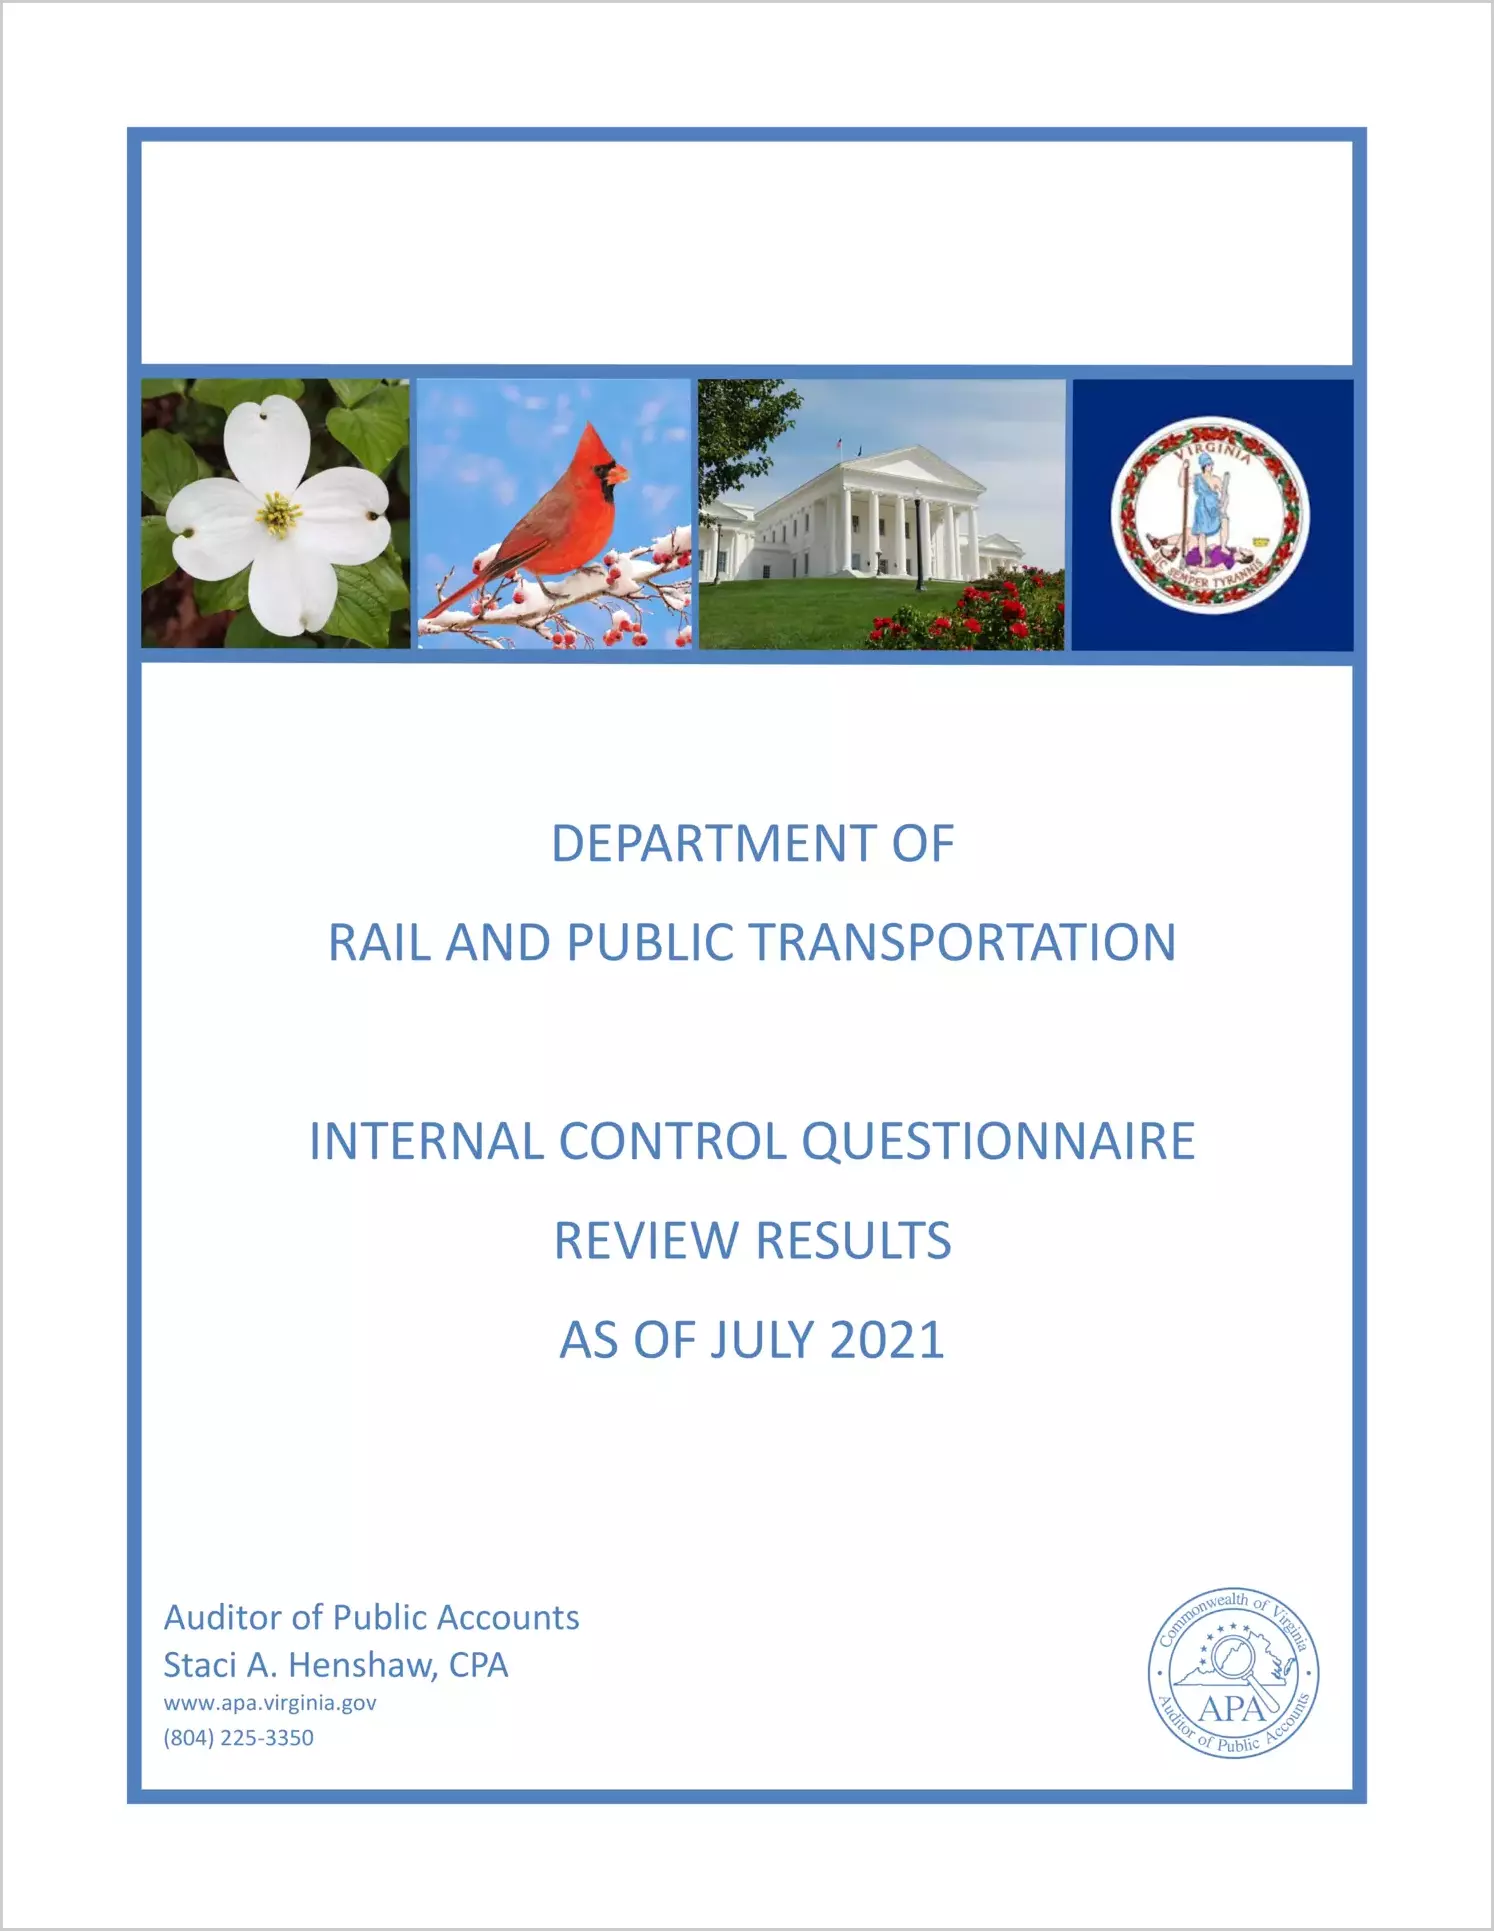 Department of Rail and Public Transportation Internal Control Questionnaire Review Results as of July 2021